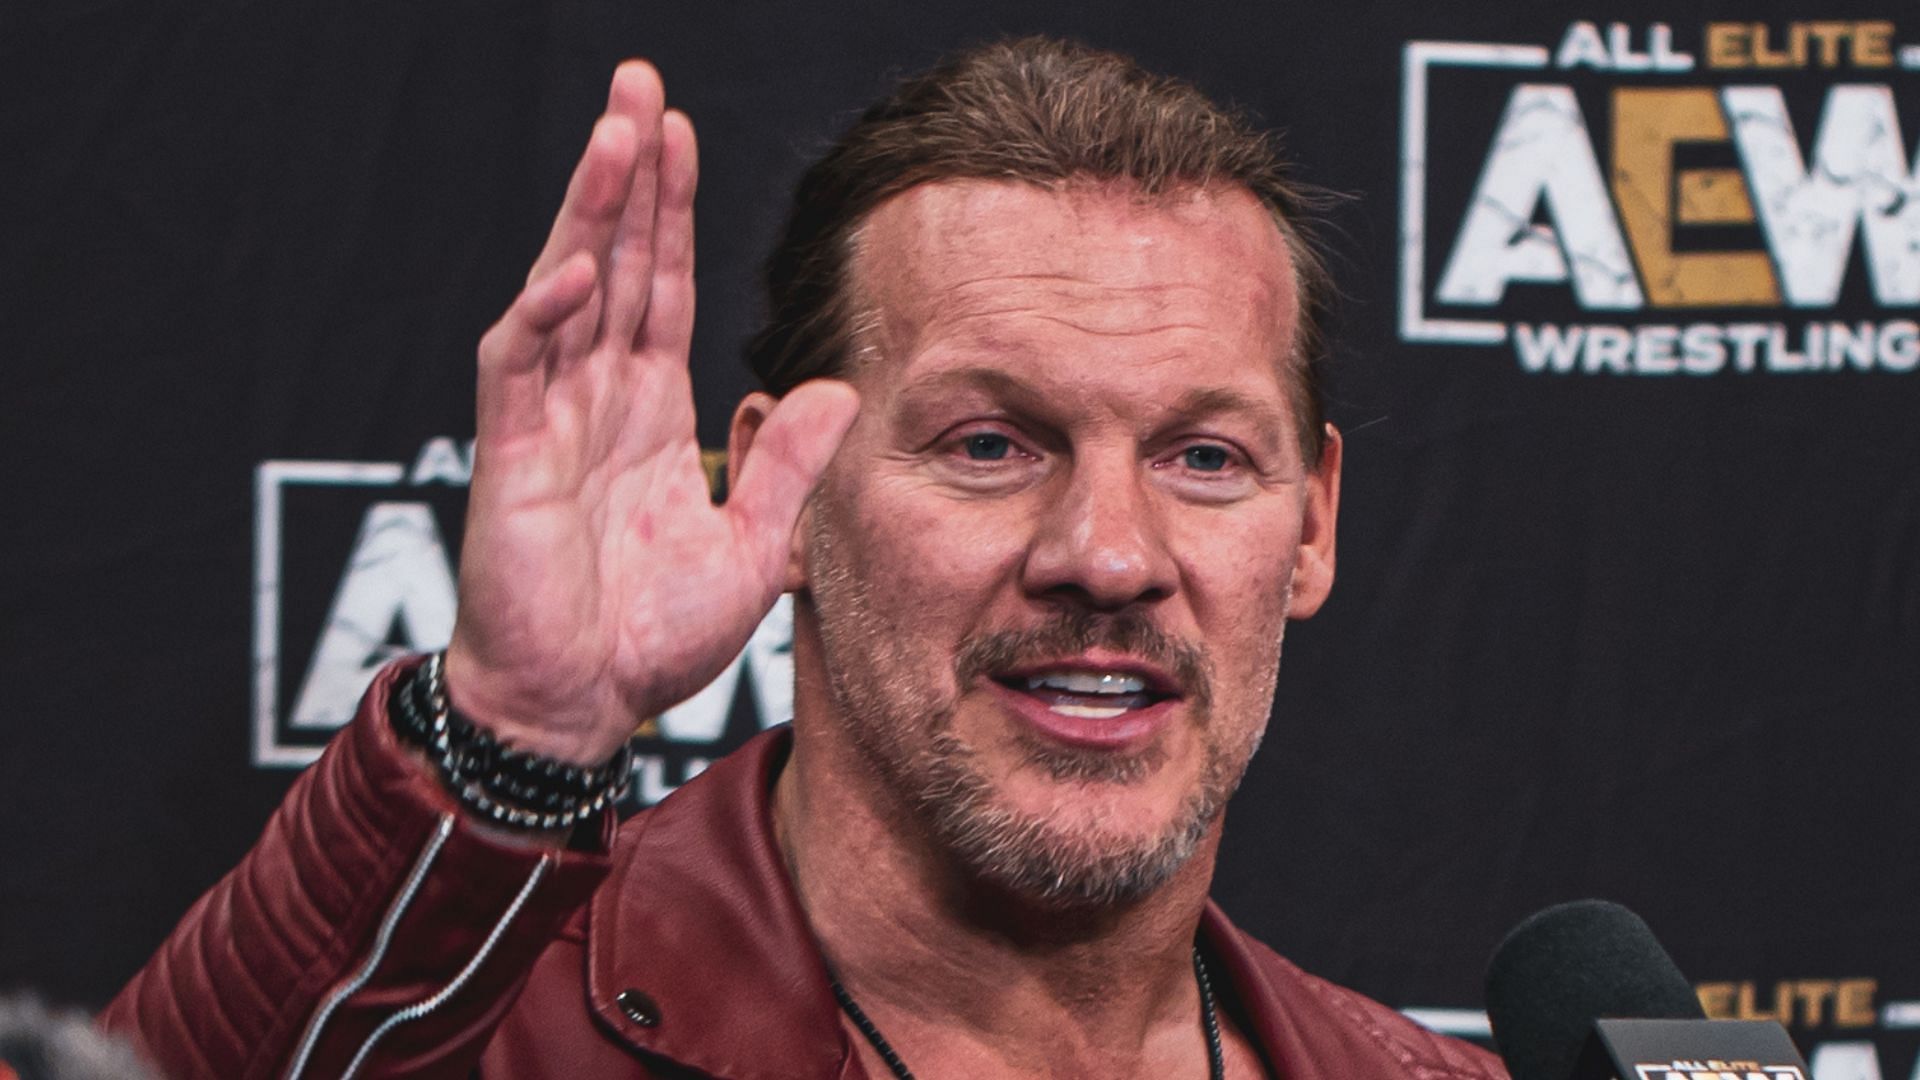 Who did Chris Jericho want to face on AEW Dynamite in Winnipeg?